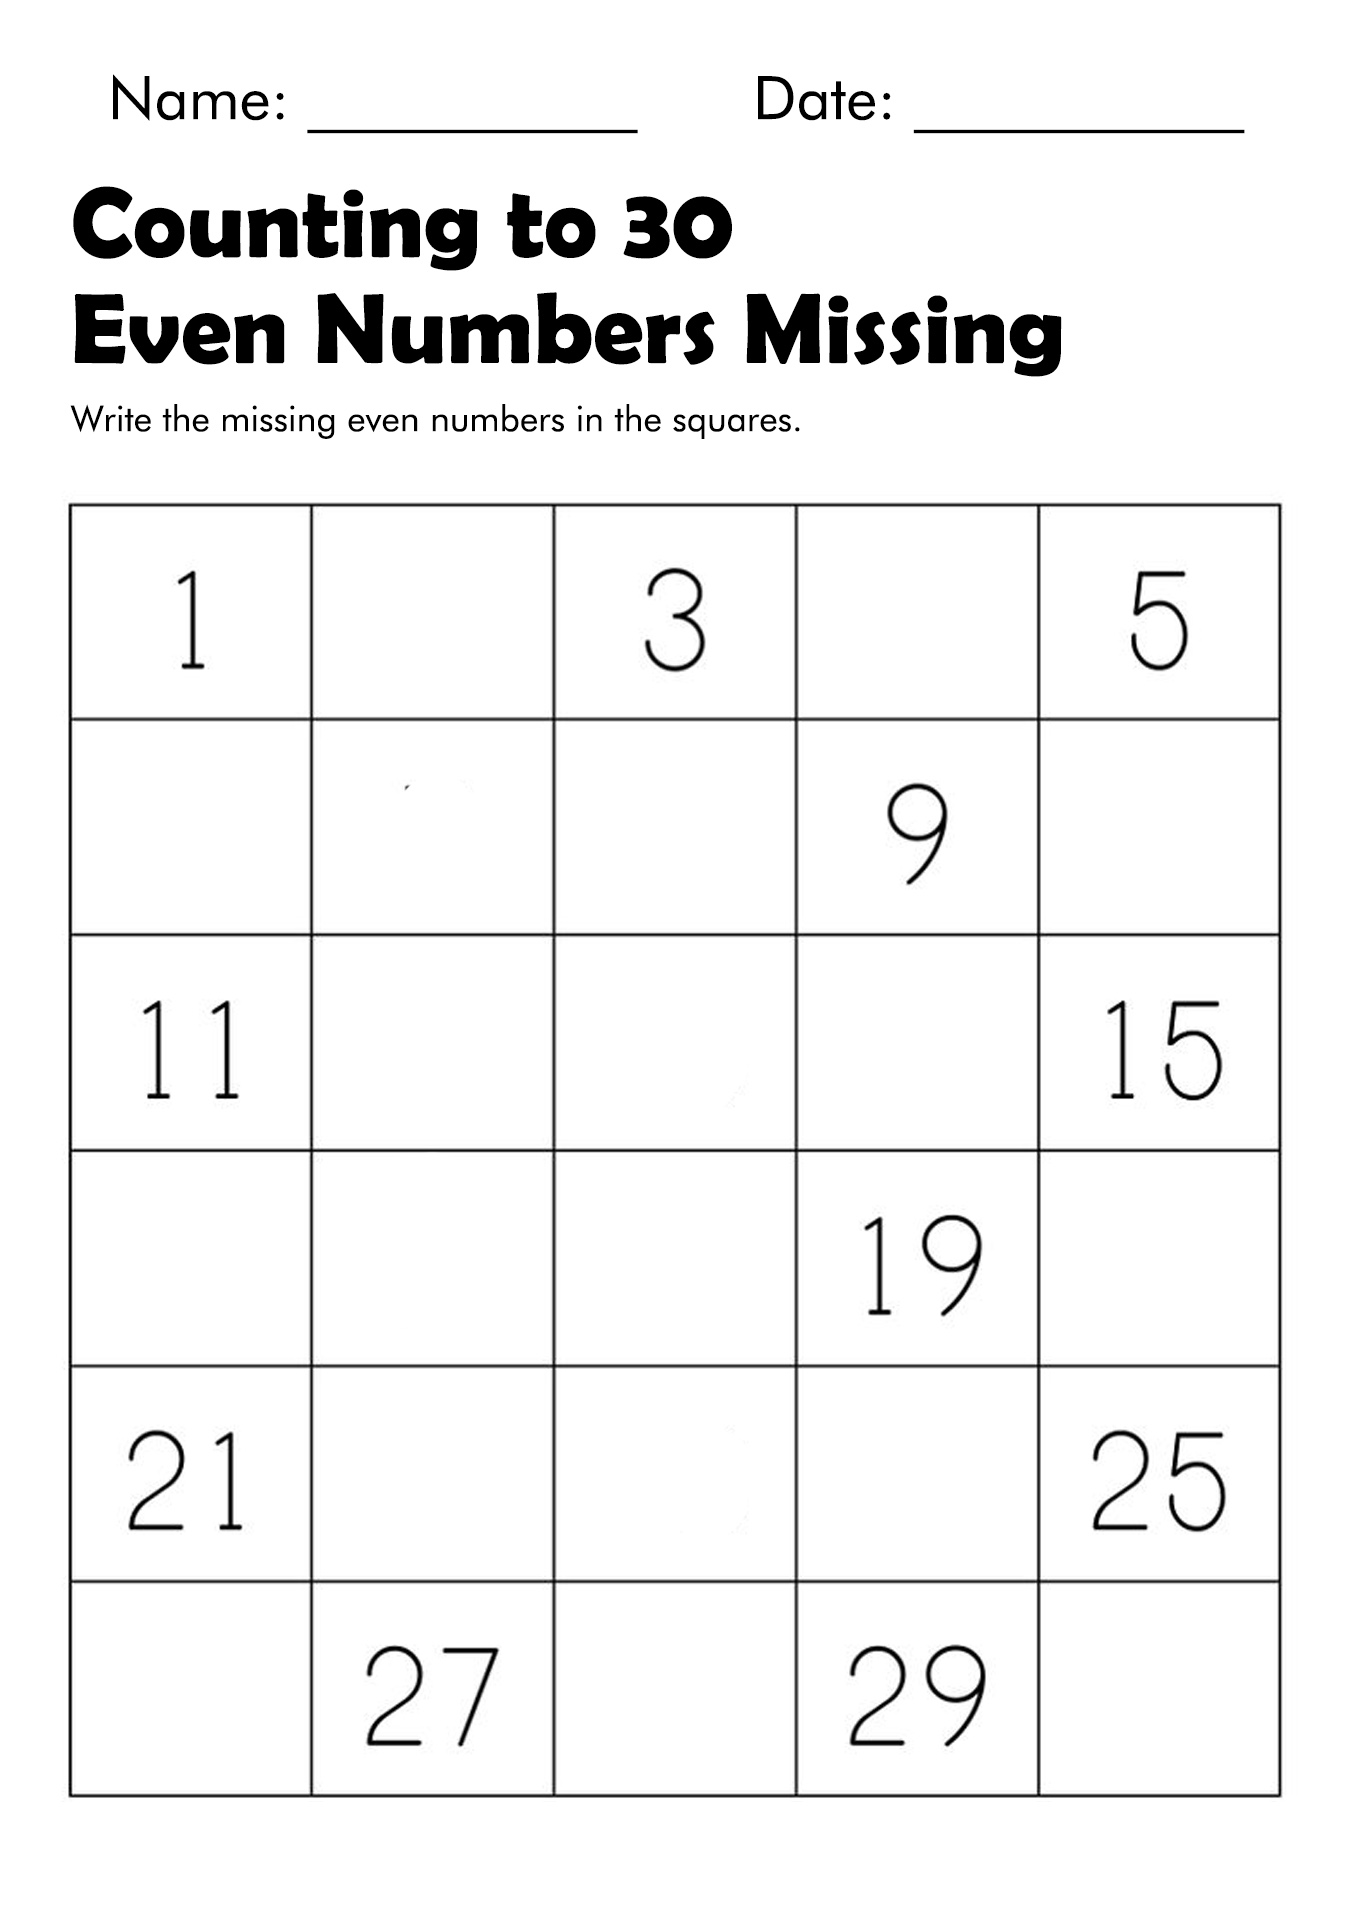 13-best-images-of-3-pictures-sequencing-worksheets-sequencing-story-events-worksheets-daily